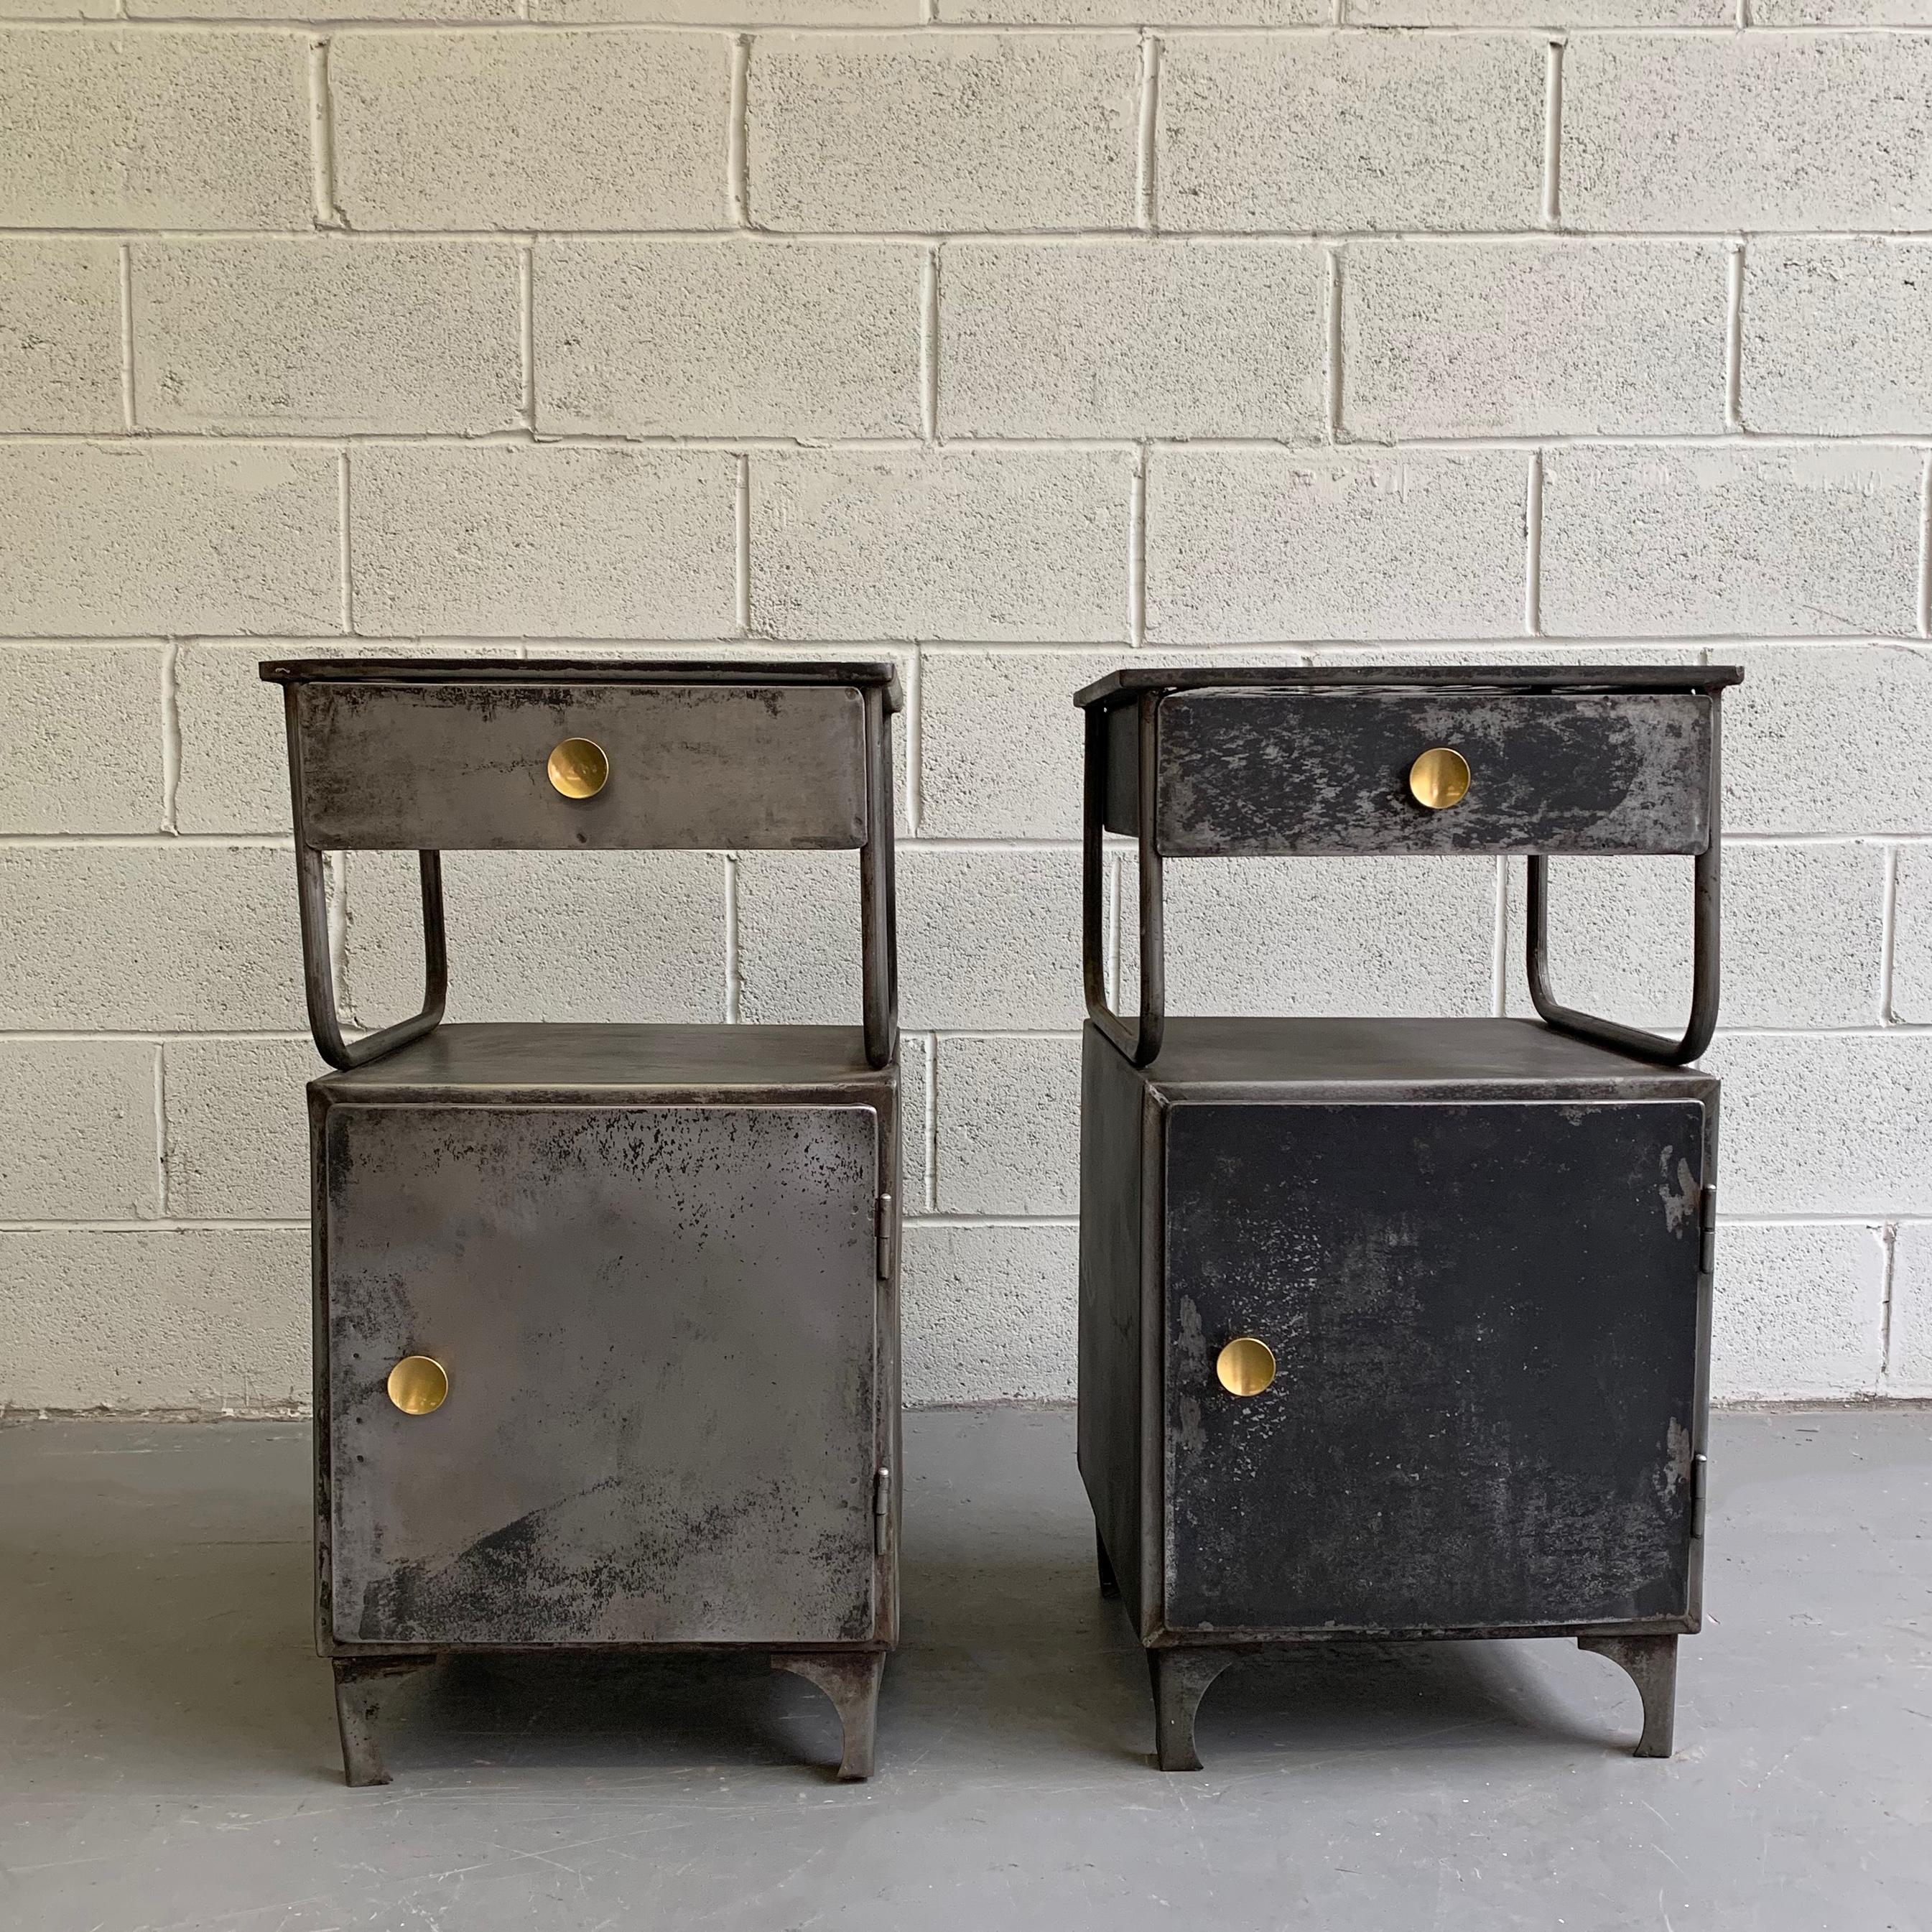 Pair of early 20th century, industrial, brushed, patinated, steel, 2-tier, hospital nightstands feature great storage on the bottom and drawers on top with brass button pulls and painted light blue interiors. The cabinets also make excellent